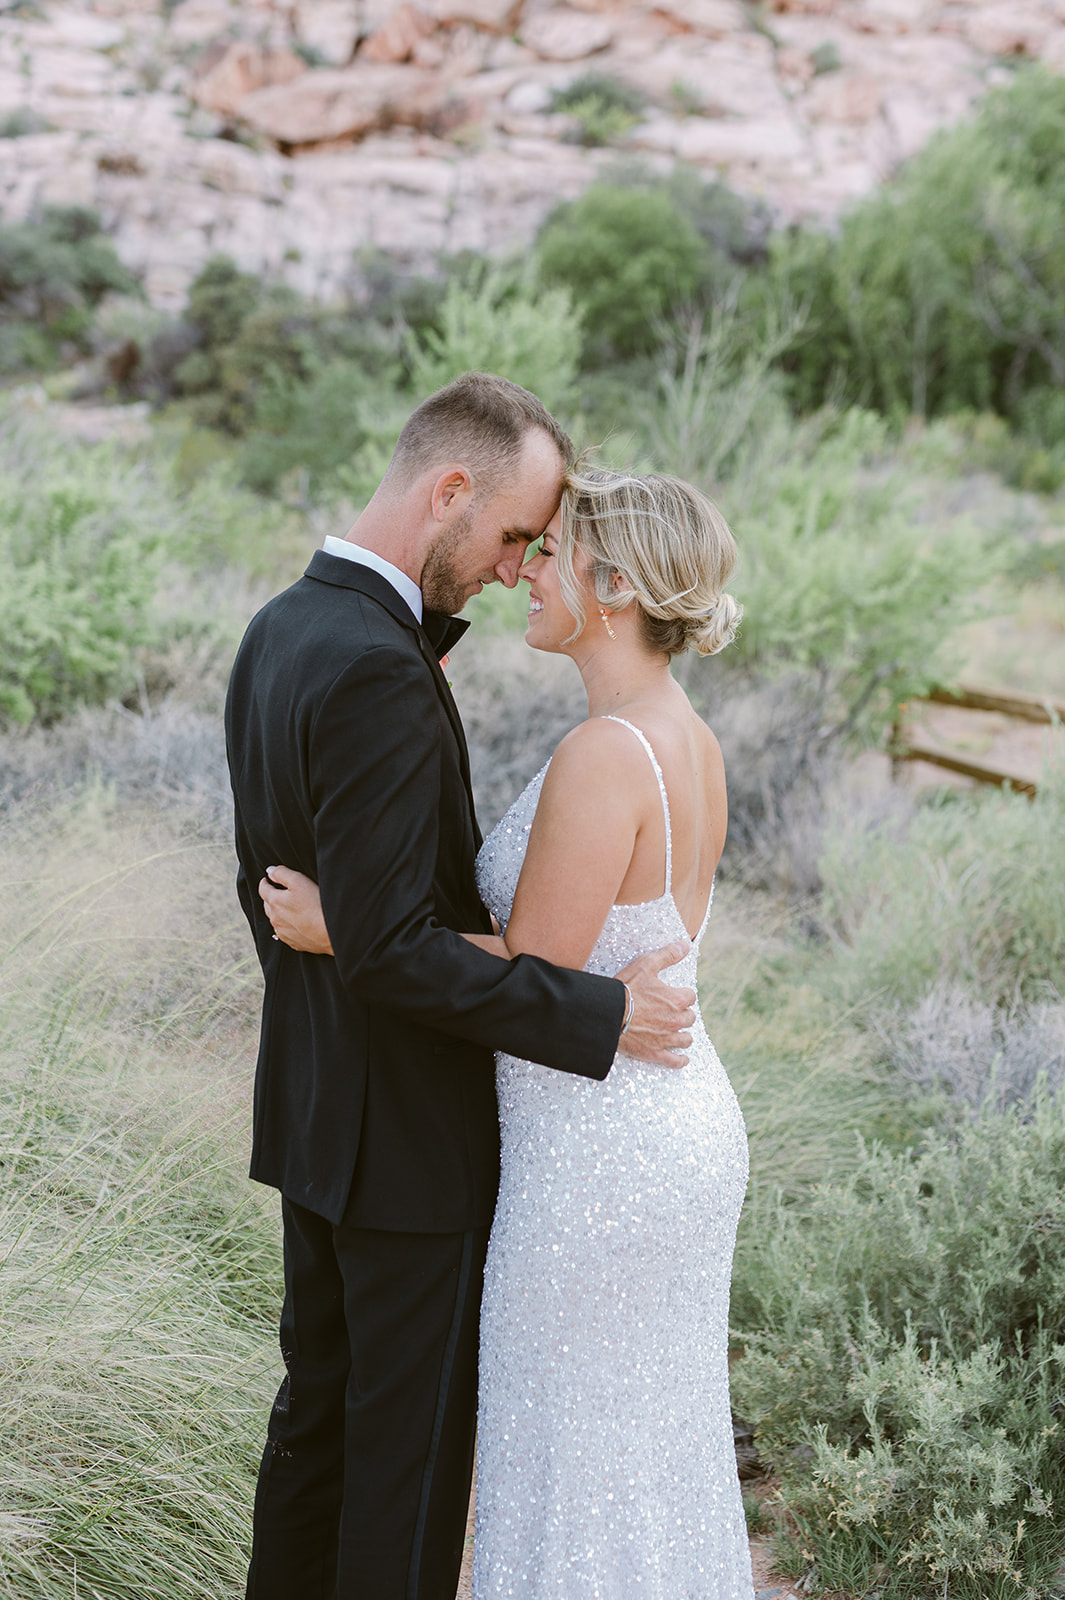 bride and groom embrace on Red Rock Boardwalk with Red Rock Canyon backdrop. Bride wearing glittering white dress.